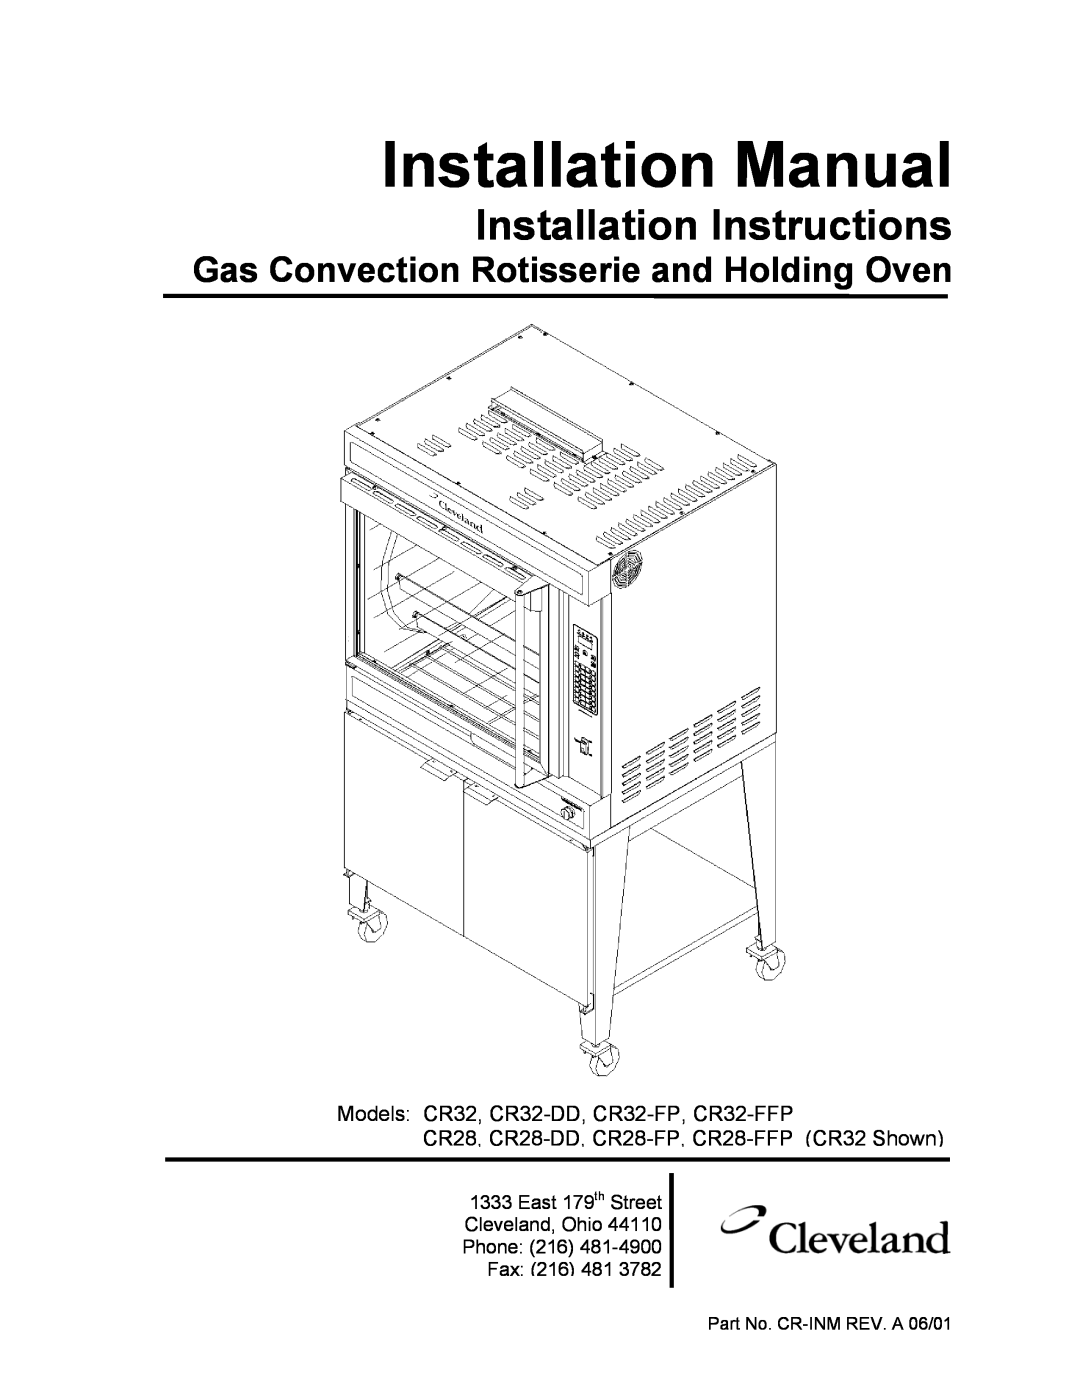 Cleveland Range CR28-DD installation manual Gas Convection Rotisserie and Holding Oven, Installation Manual, Fax: 216 481 